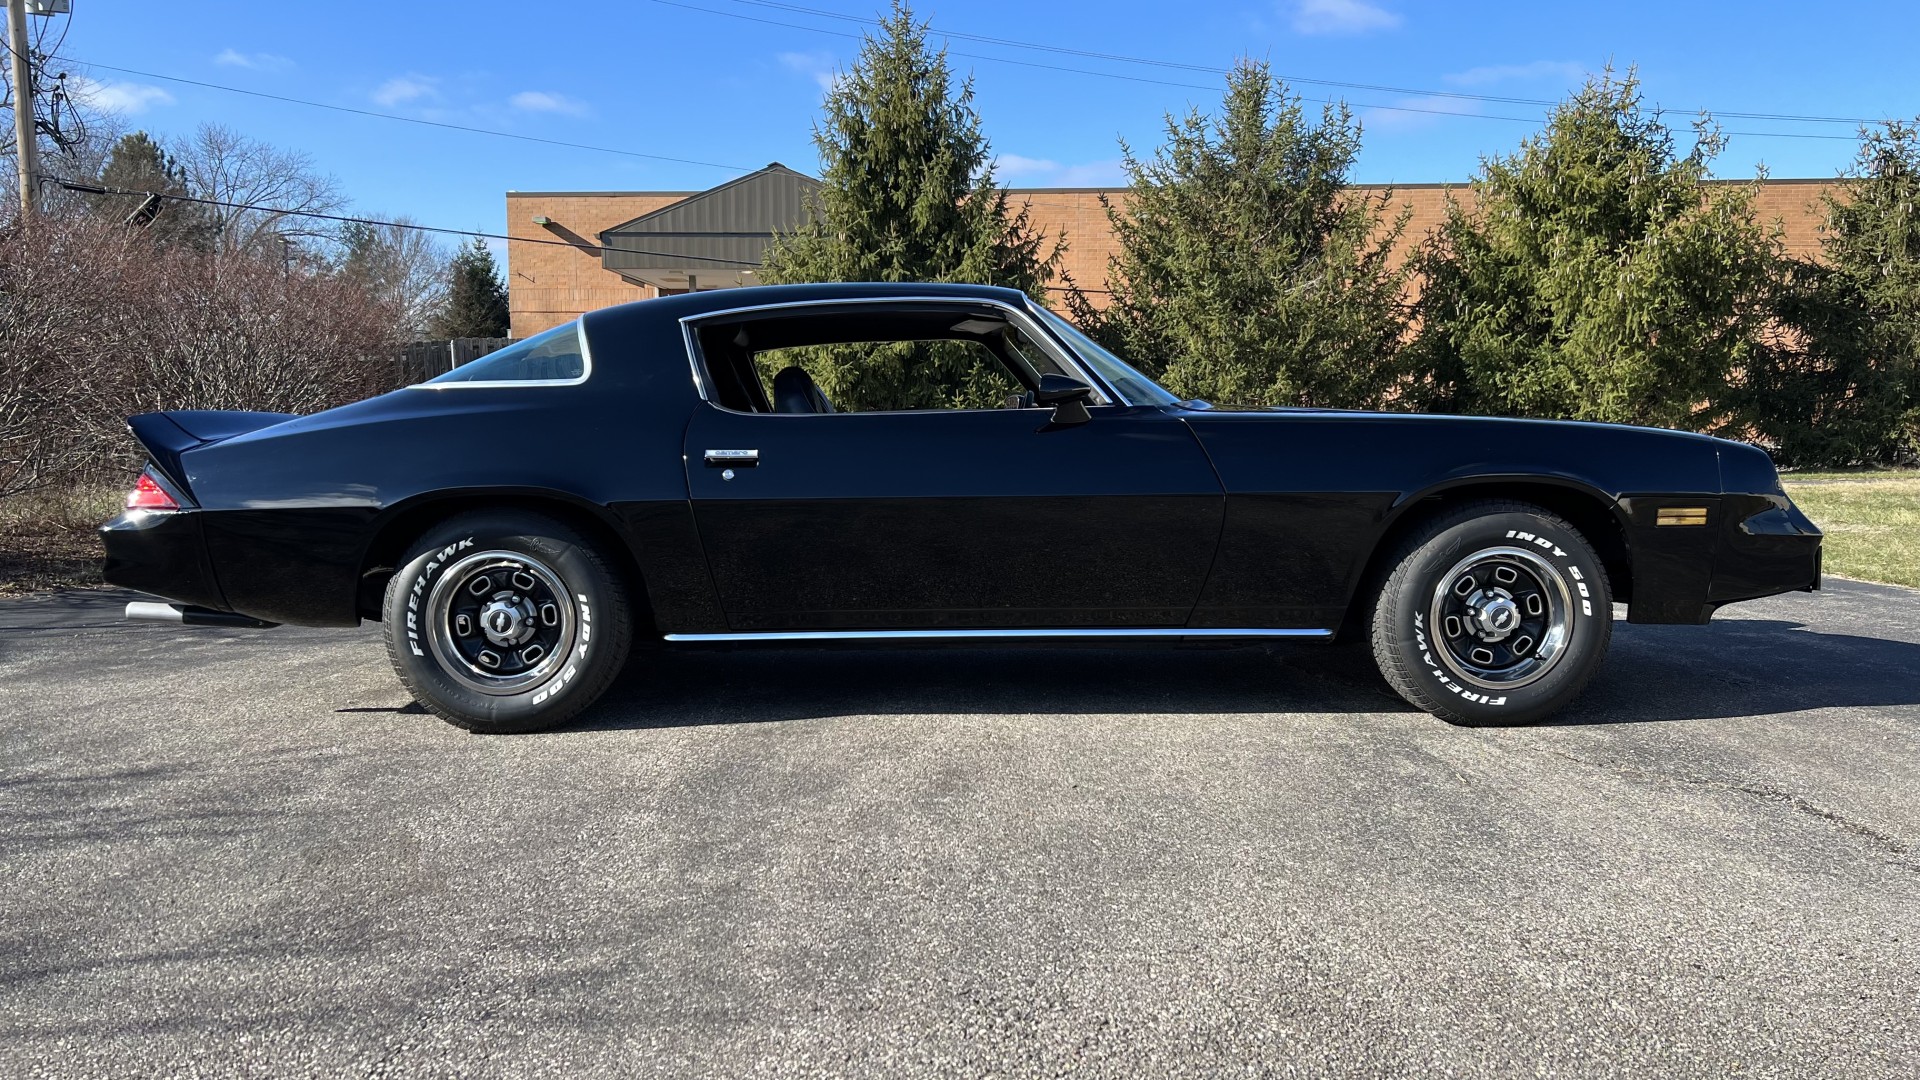 1979 Camaro, 4 Speed, Numbers Match, SOLD!